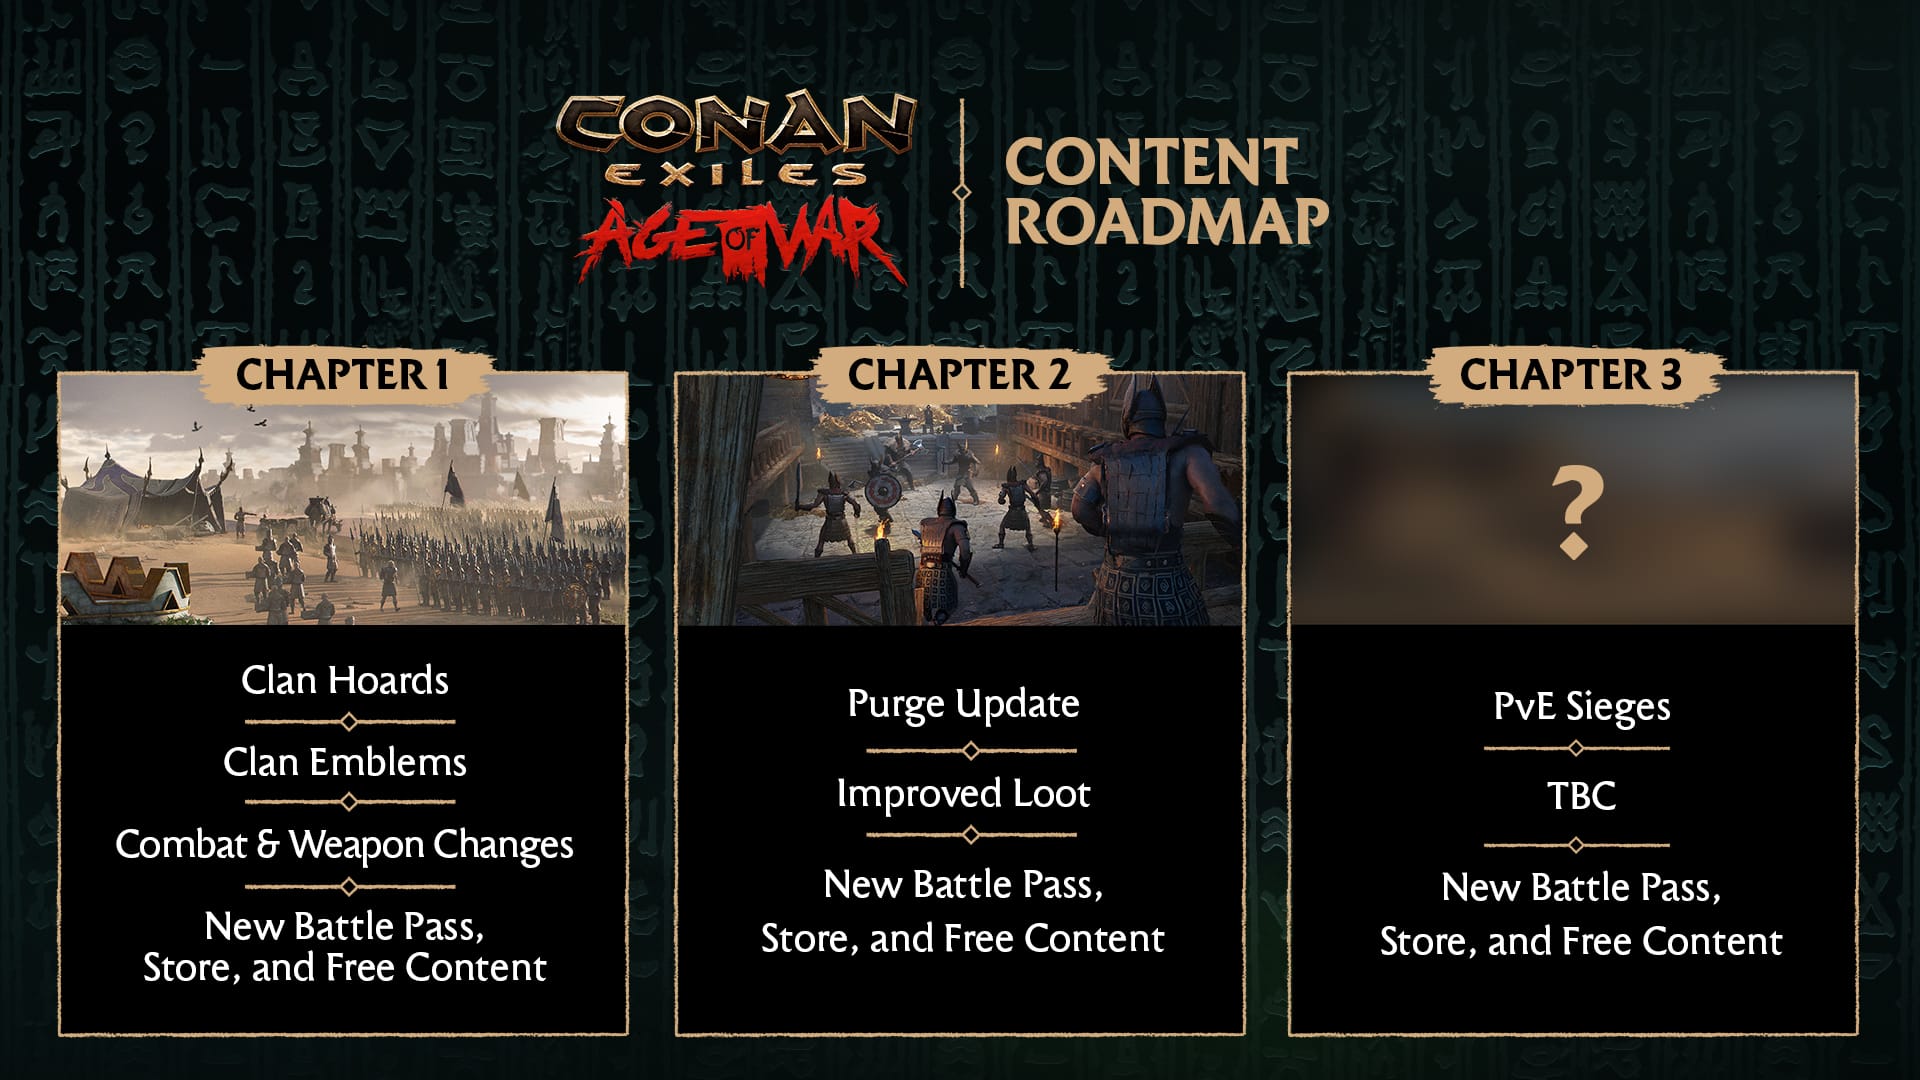 Conan Exiles Age of War Chapter 2